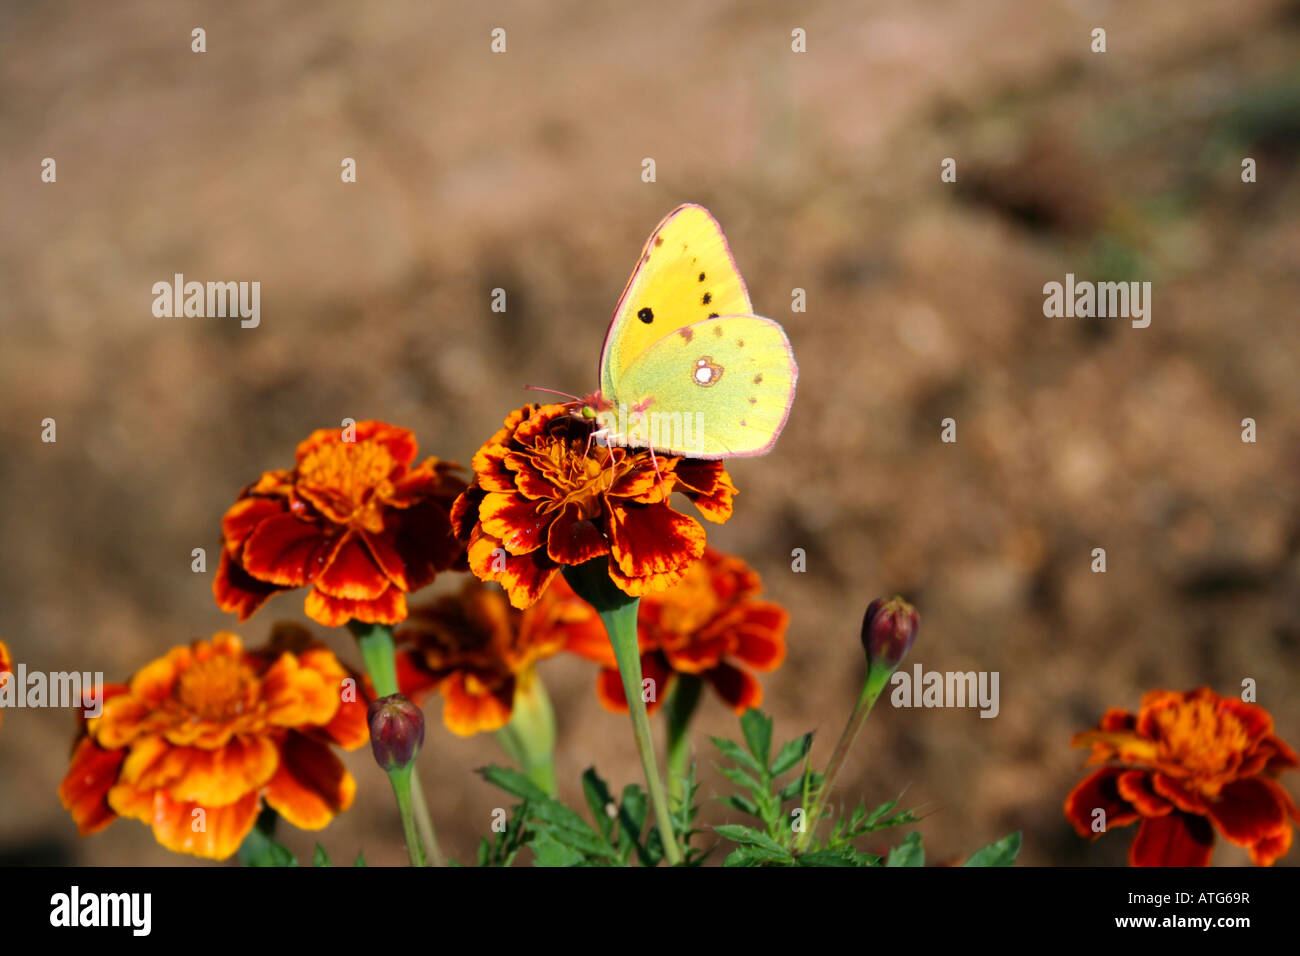 Clouded Sulphur butterfly Lemon colored butterfly over yellow targetes flowers Stock Photo